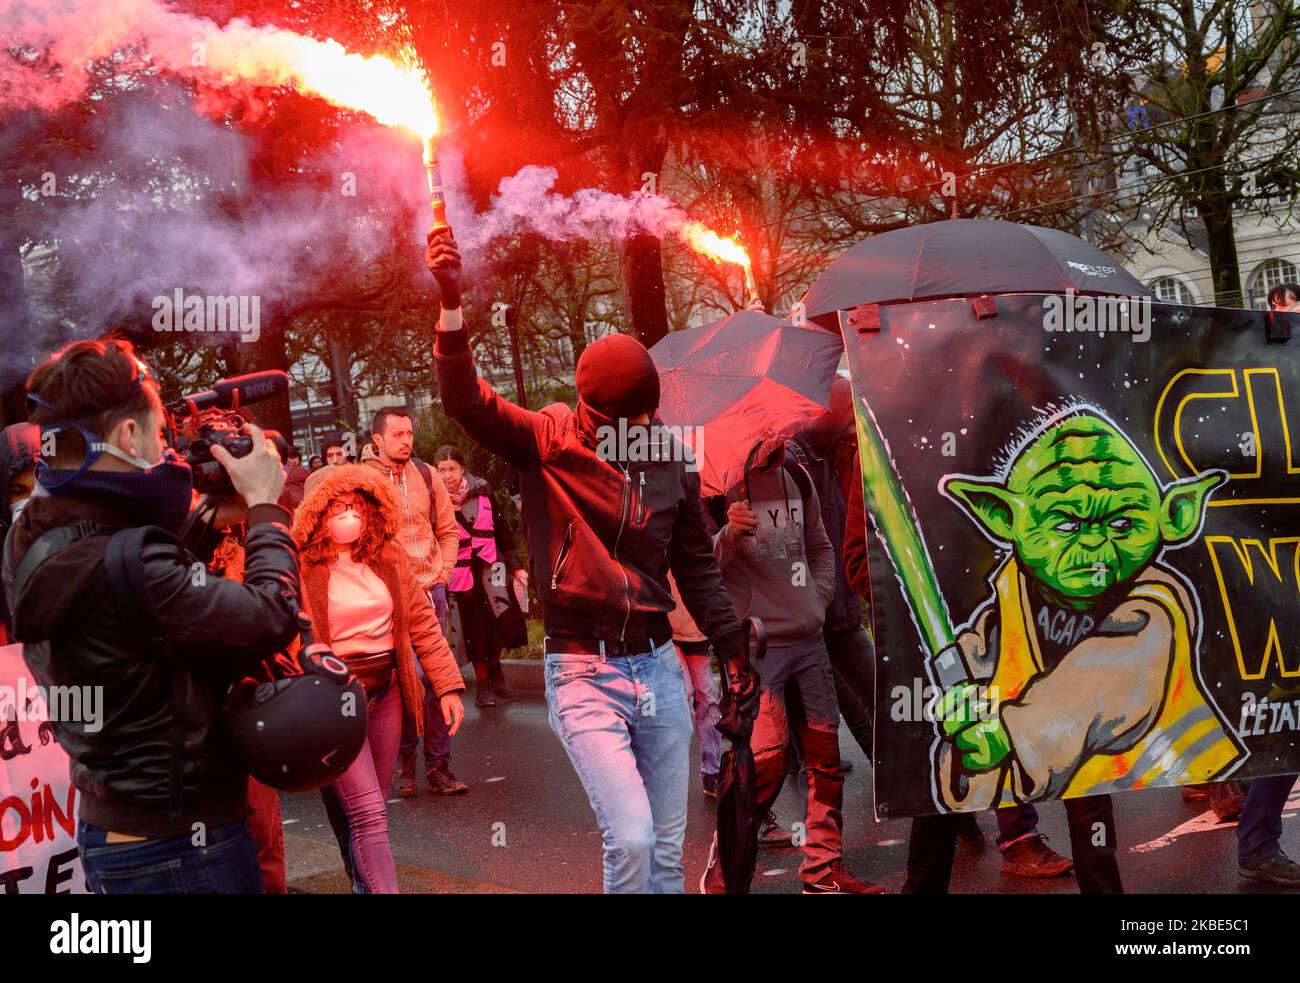 Black bloc the demonstration against the pension reform project on January 9, 2020 in Nantes, France (Photo by Estelle Ruiz/NurPhoto) Stock Photo